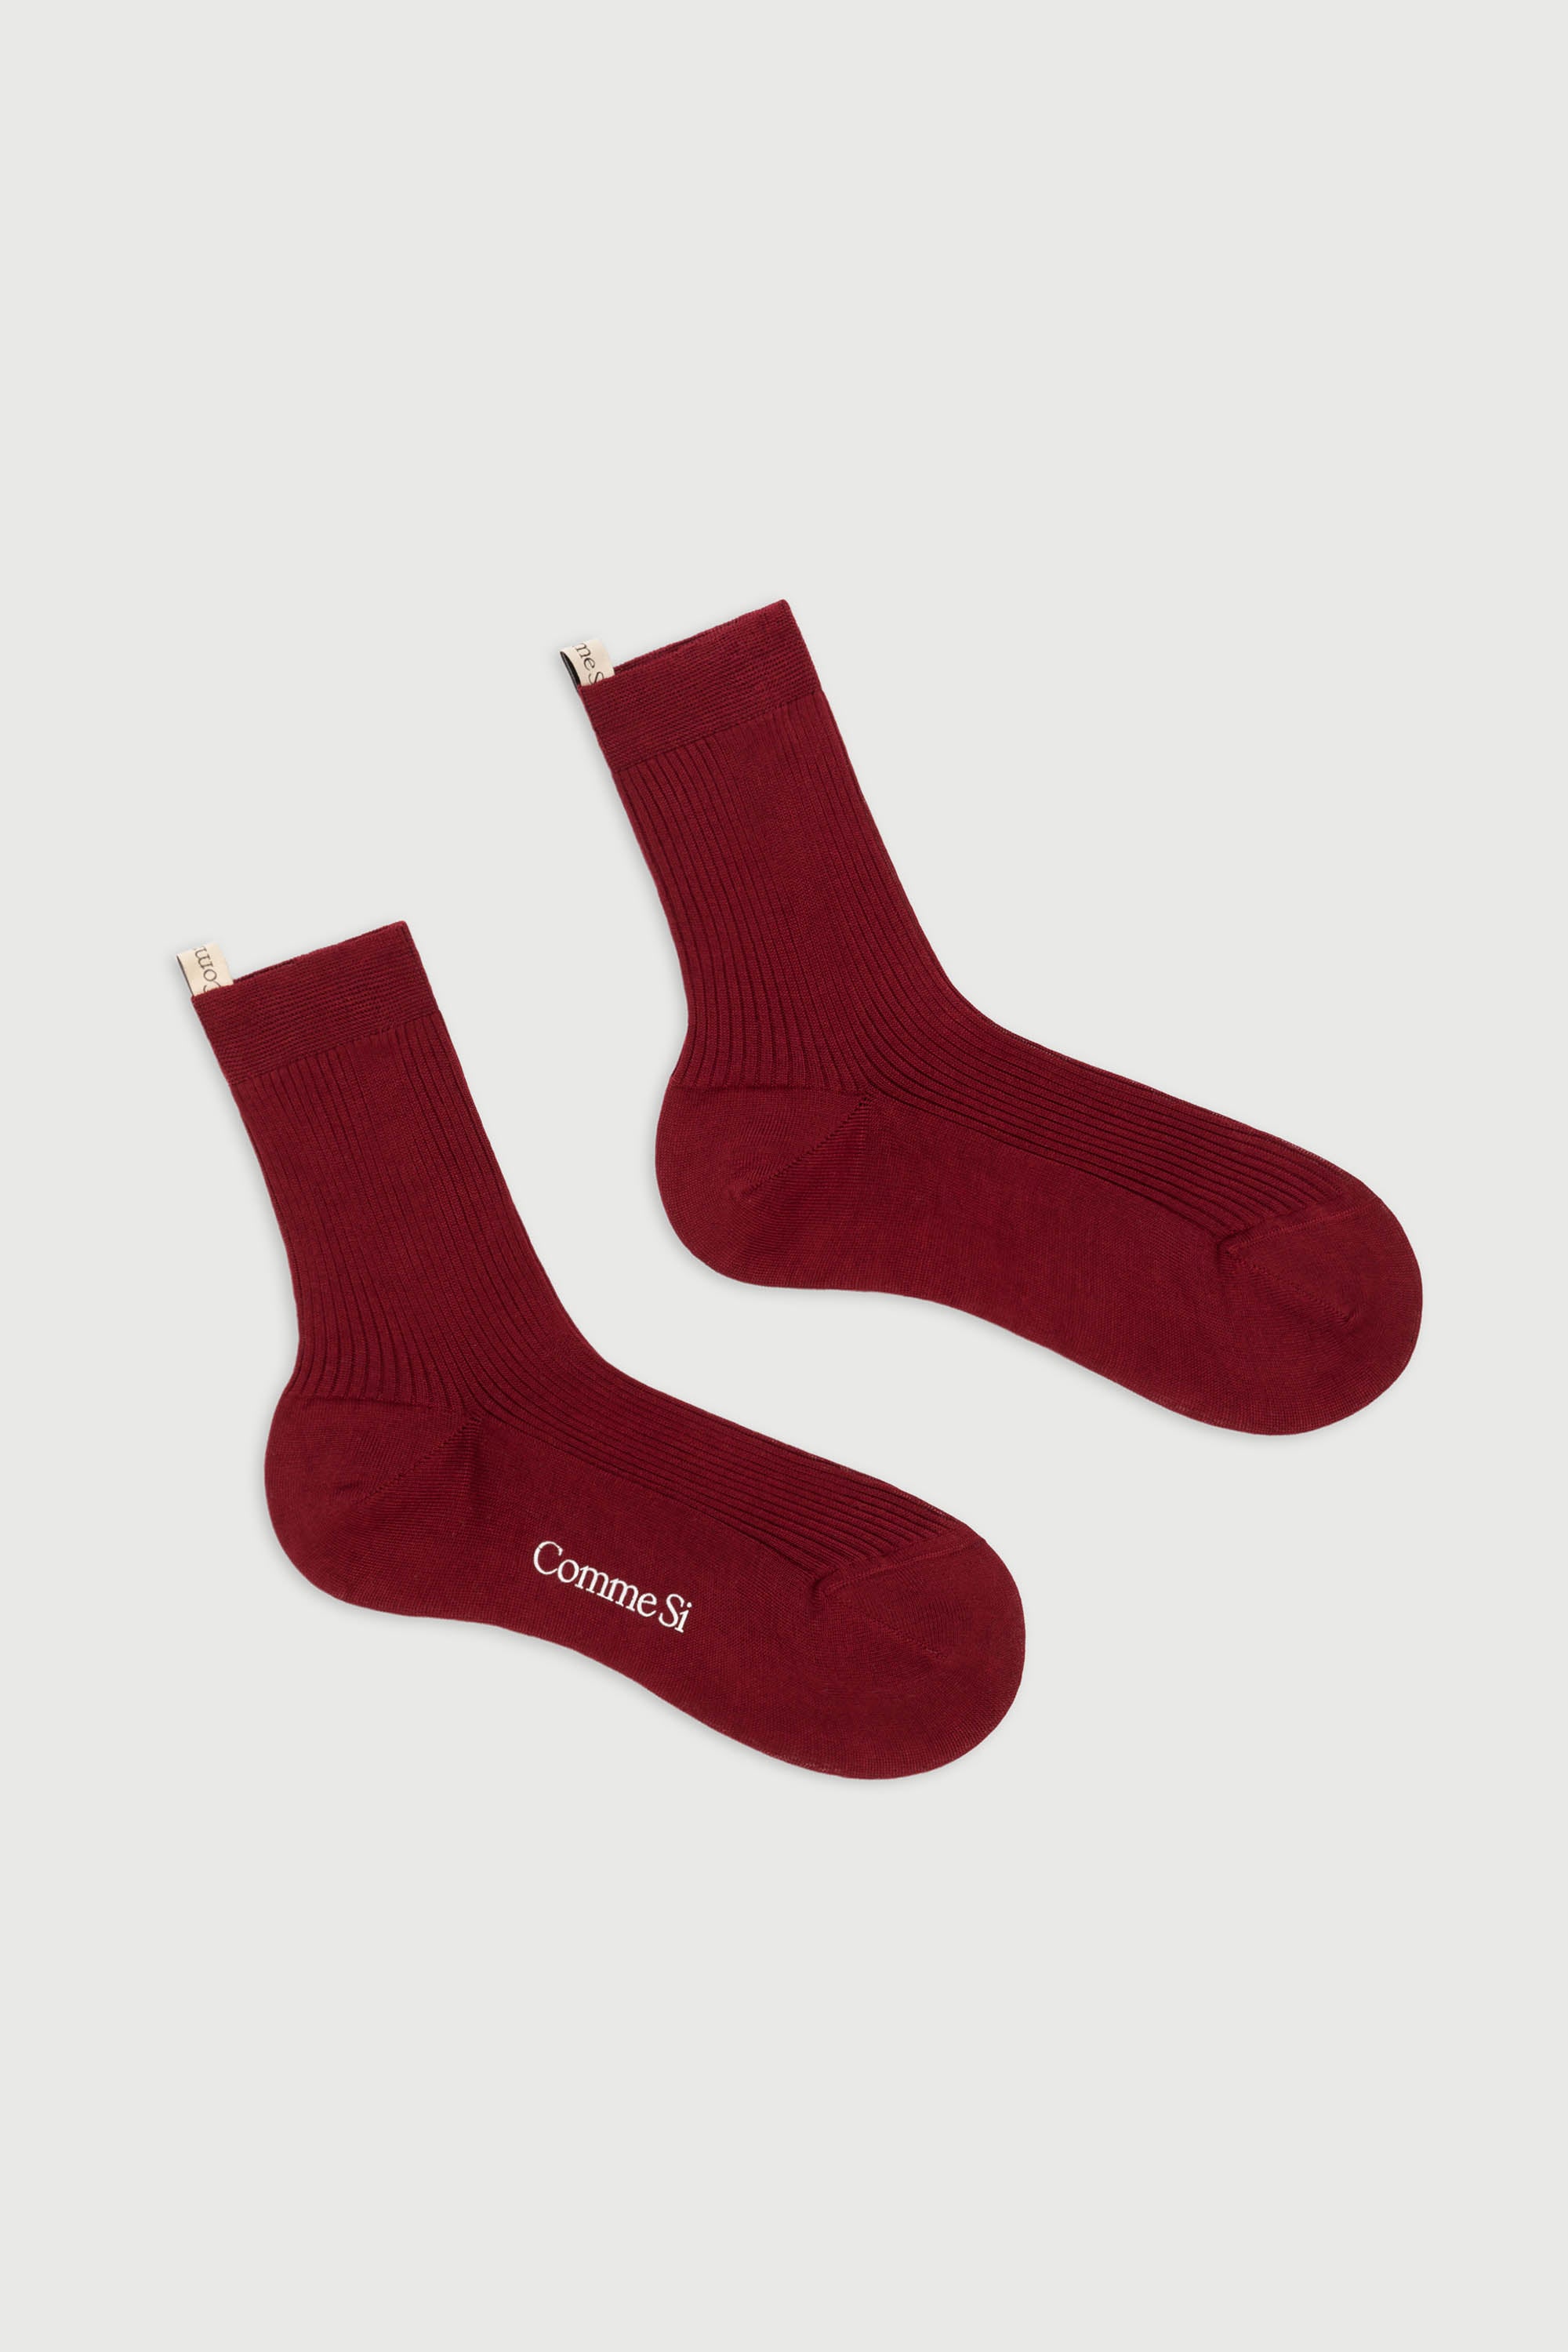 The Agnelli Sock in Burgundy, Egyptian Cotton